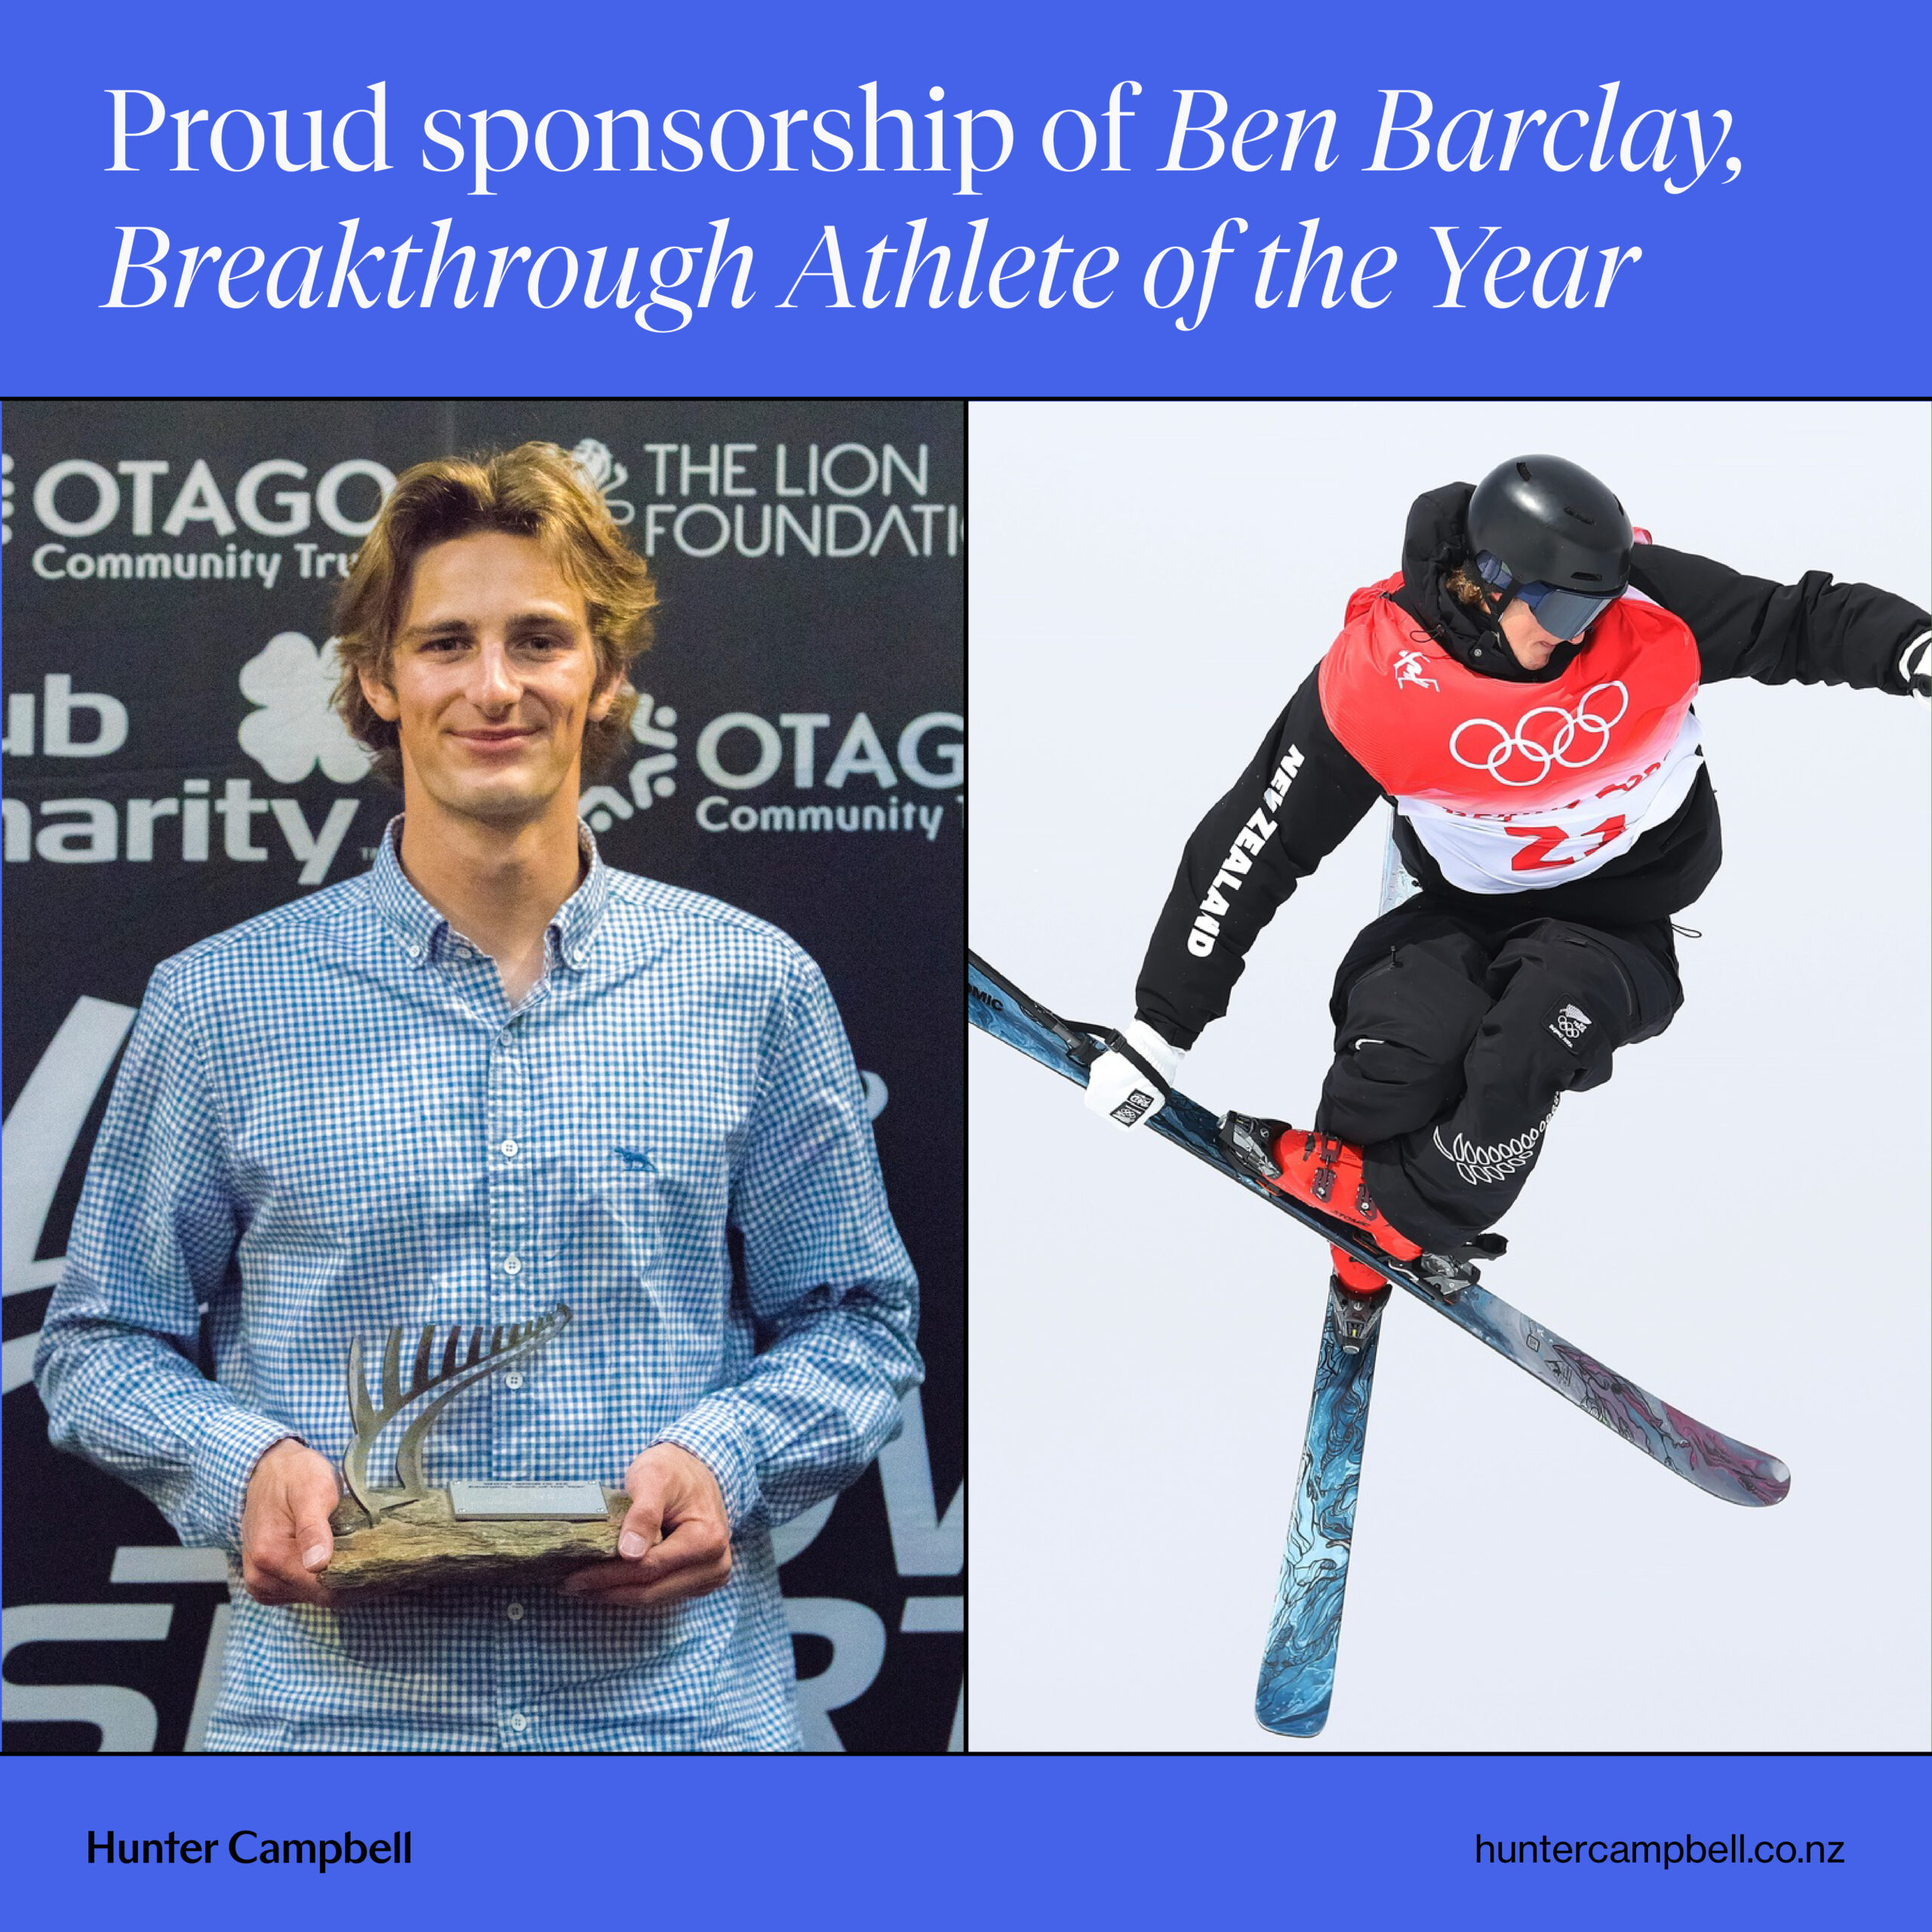 Hunter Campbell sponsored athlete Ben Barclay awarded 2022 Breakthrough Athlete of the Year at SnowSports New Zealand Awards.